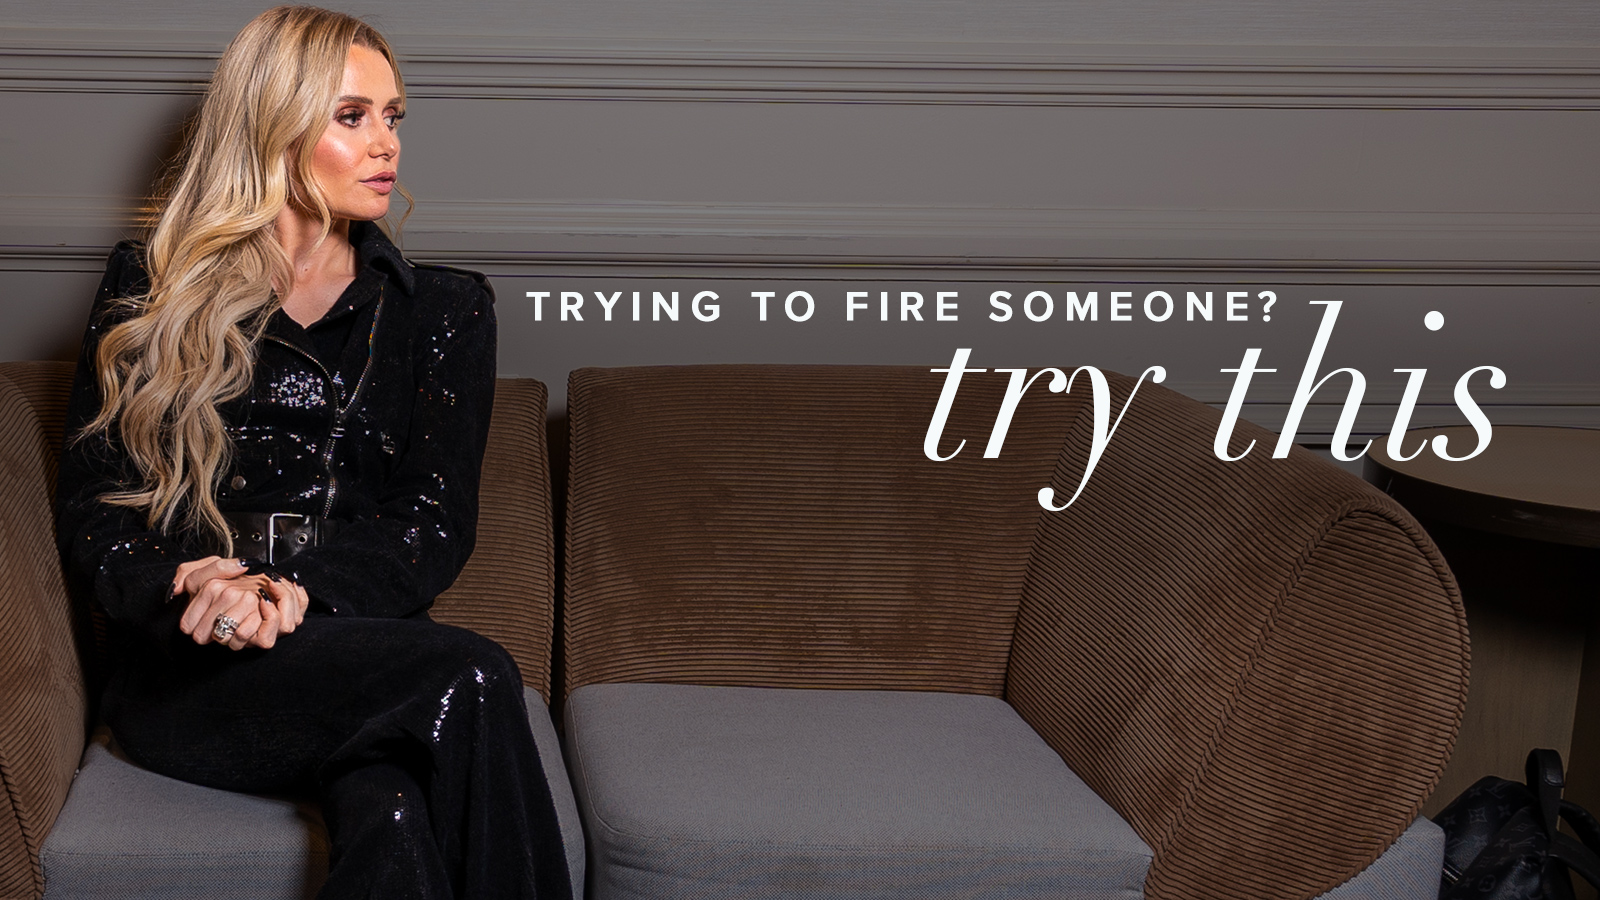 Natalie Dawson, dressed in all black, sits on the left side of a brown and gray corduroy couch, looking to her left toward the title, "Trying to fire someone? Try this!"